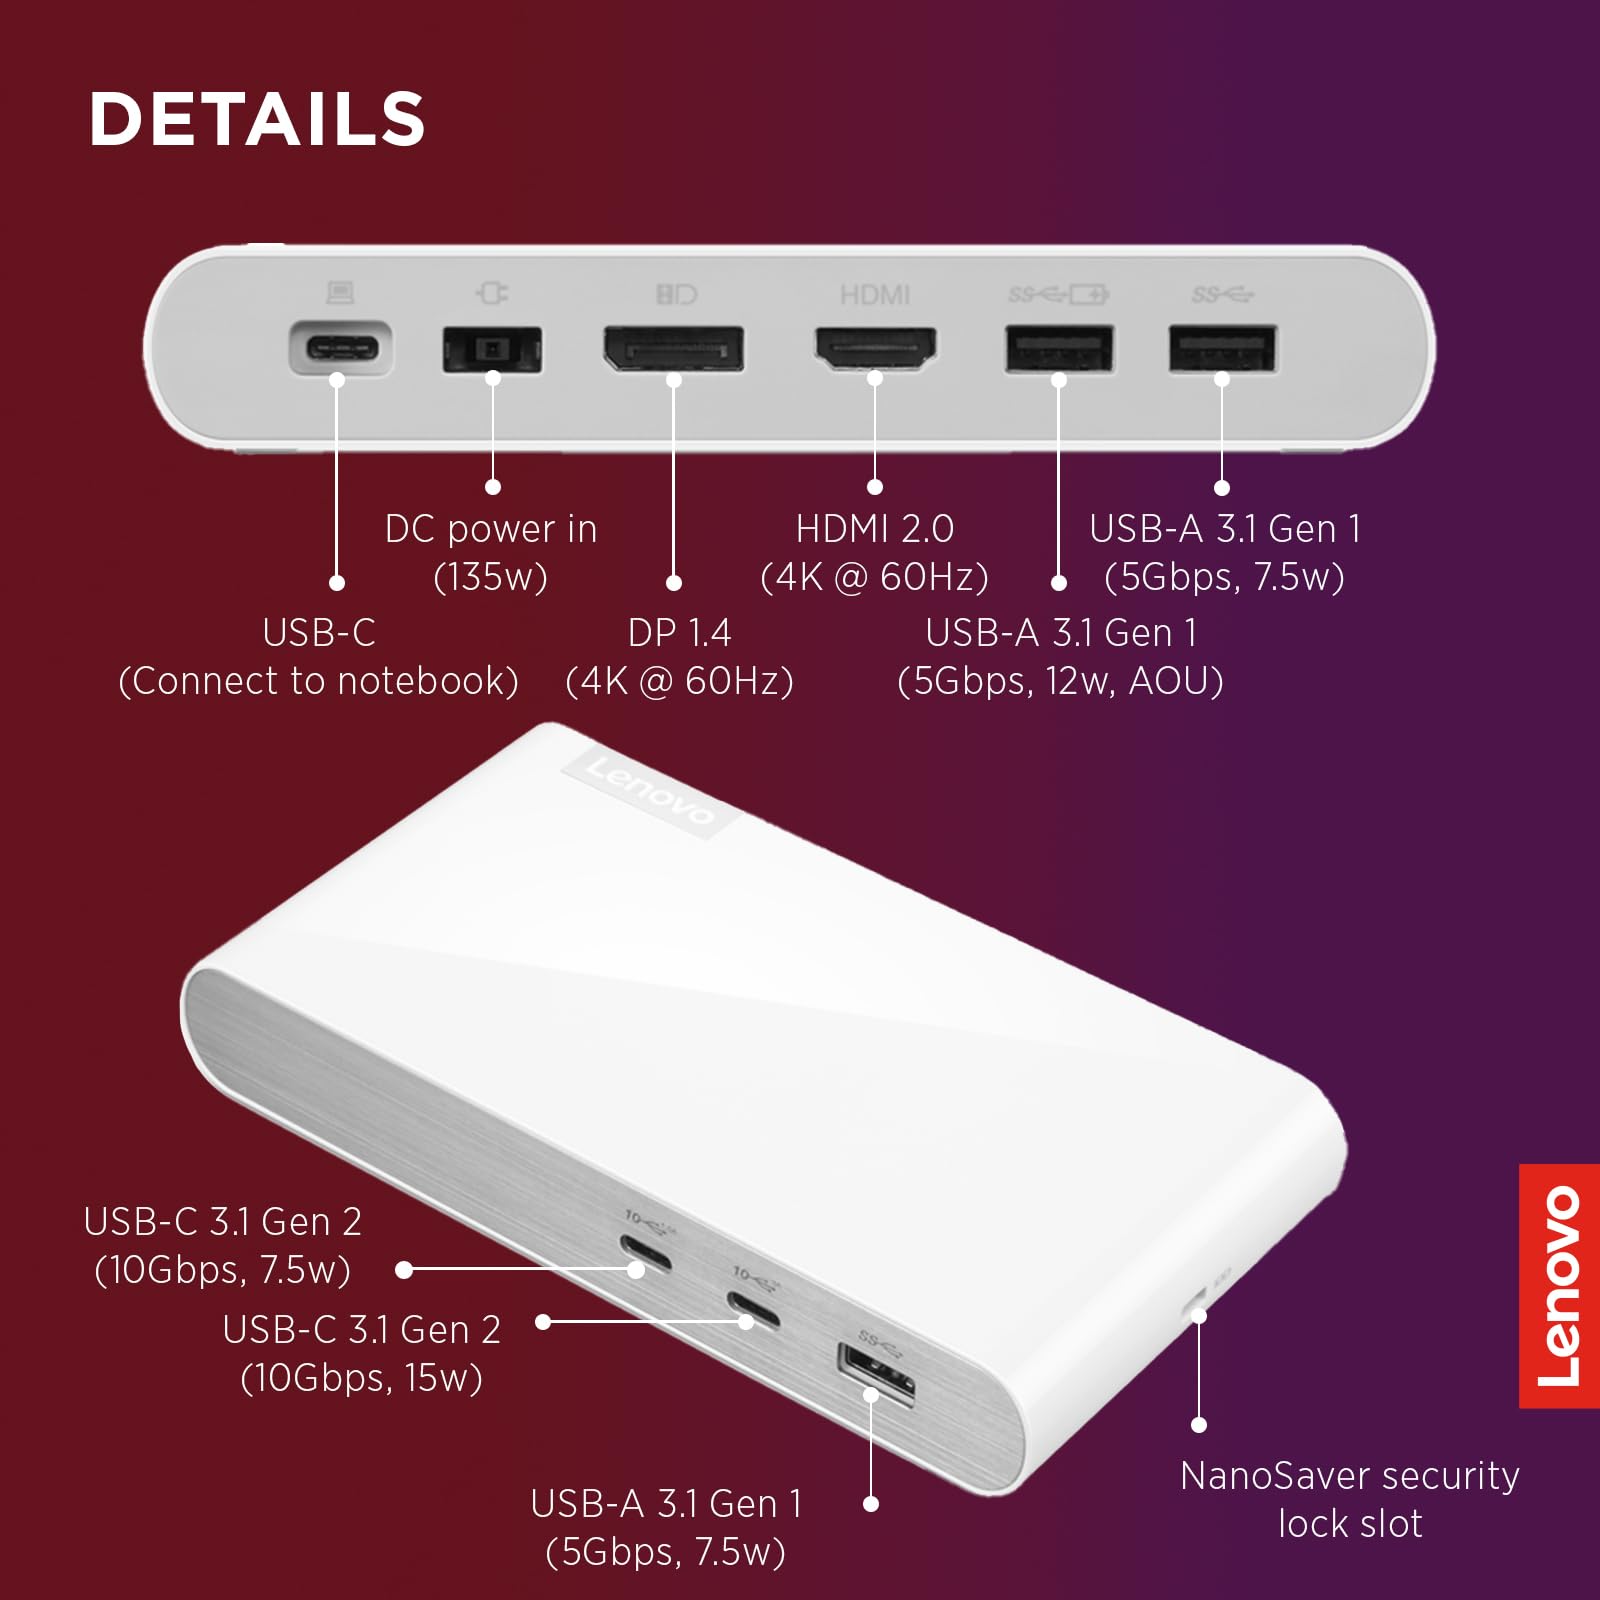 Lenovo 500 USB-C Universal Dock – Laptop USB C Docking Station – Dual Display at 4K – 1DP 1.4 and 1 HDMI 2.0 – 100W – Charging for Laptop – 2 USB-C Ports – 3 USB-A Ports – Windows Compatible